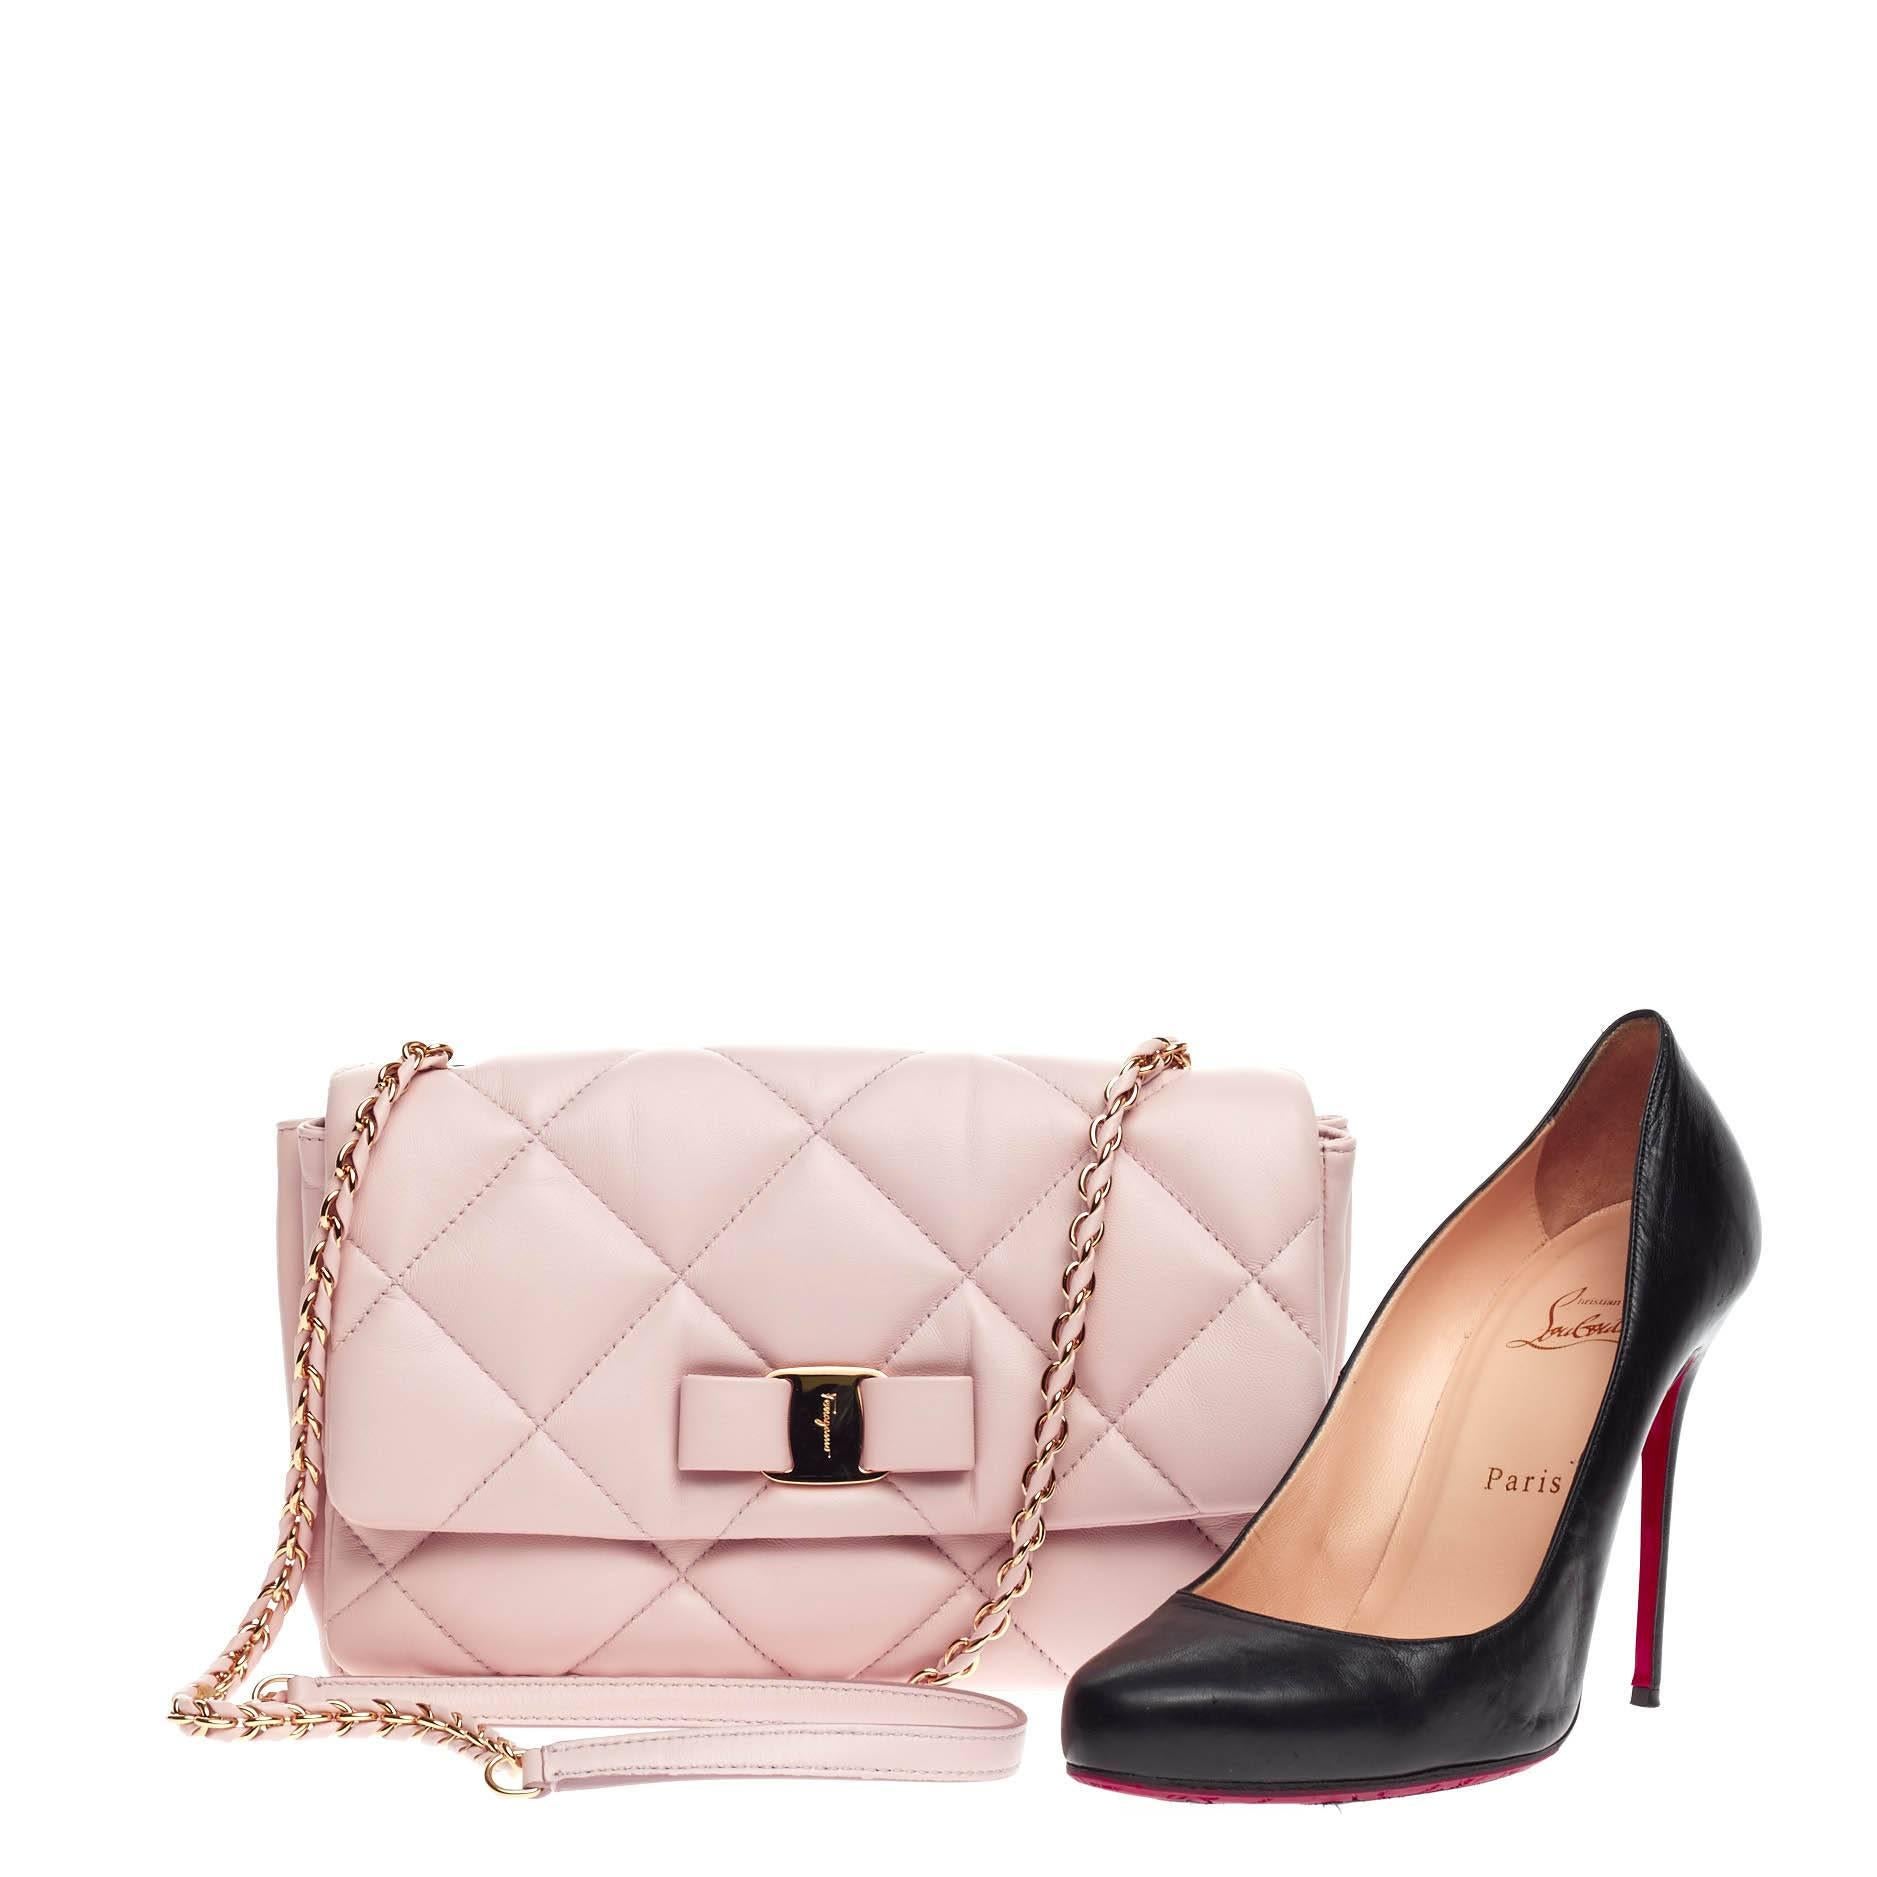 This authentic Salvatore Ferragamo Ginny Crossbody Quilted Leather Medium mixes a classic design with youthful, feminine flair. Crafted from baby pink quilted leather, this petite crossbody features the stylish Vara-shoe pleated bow design classic